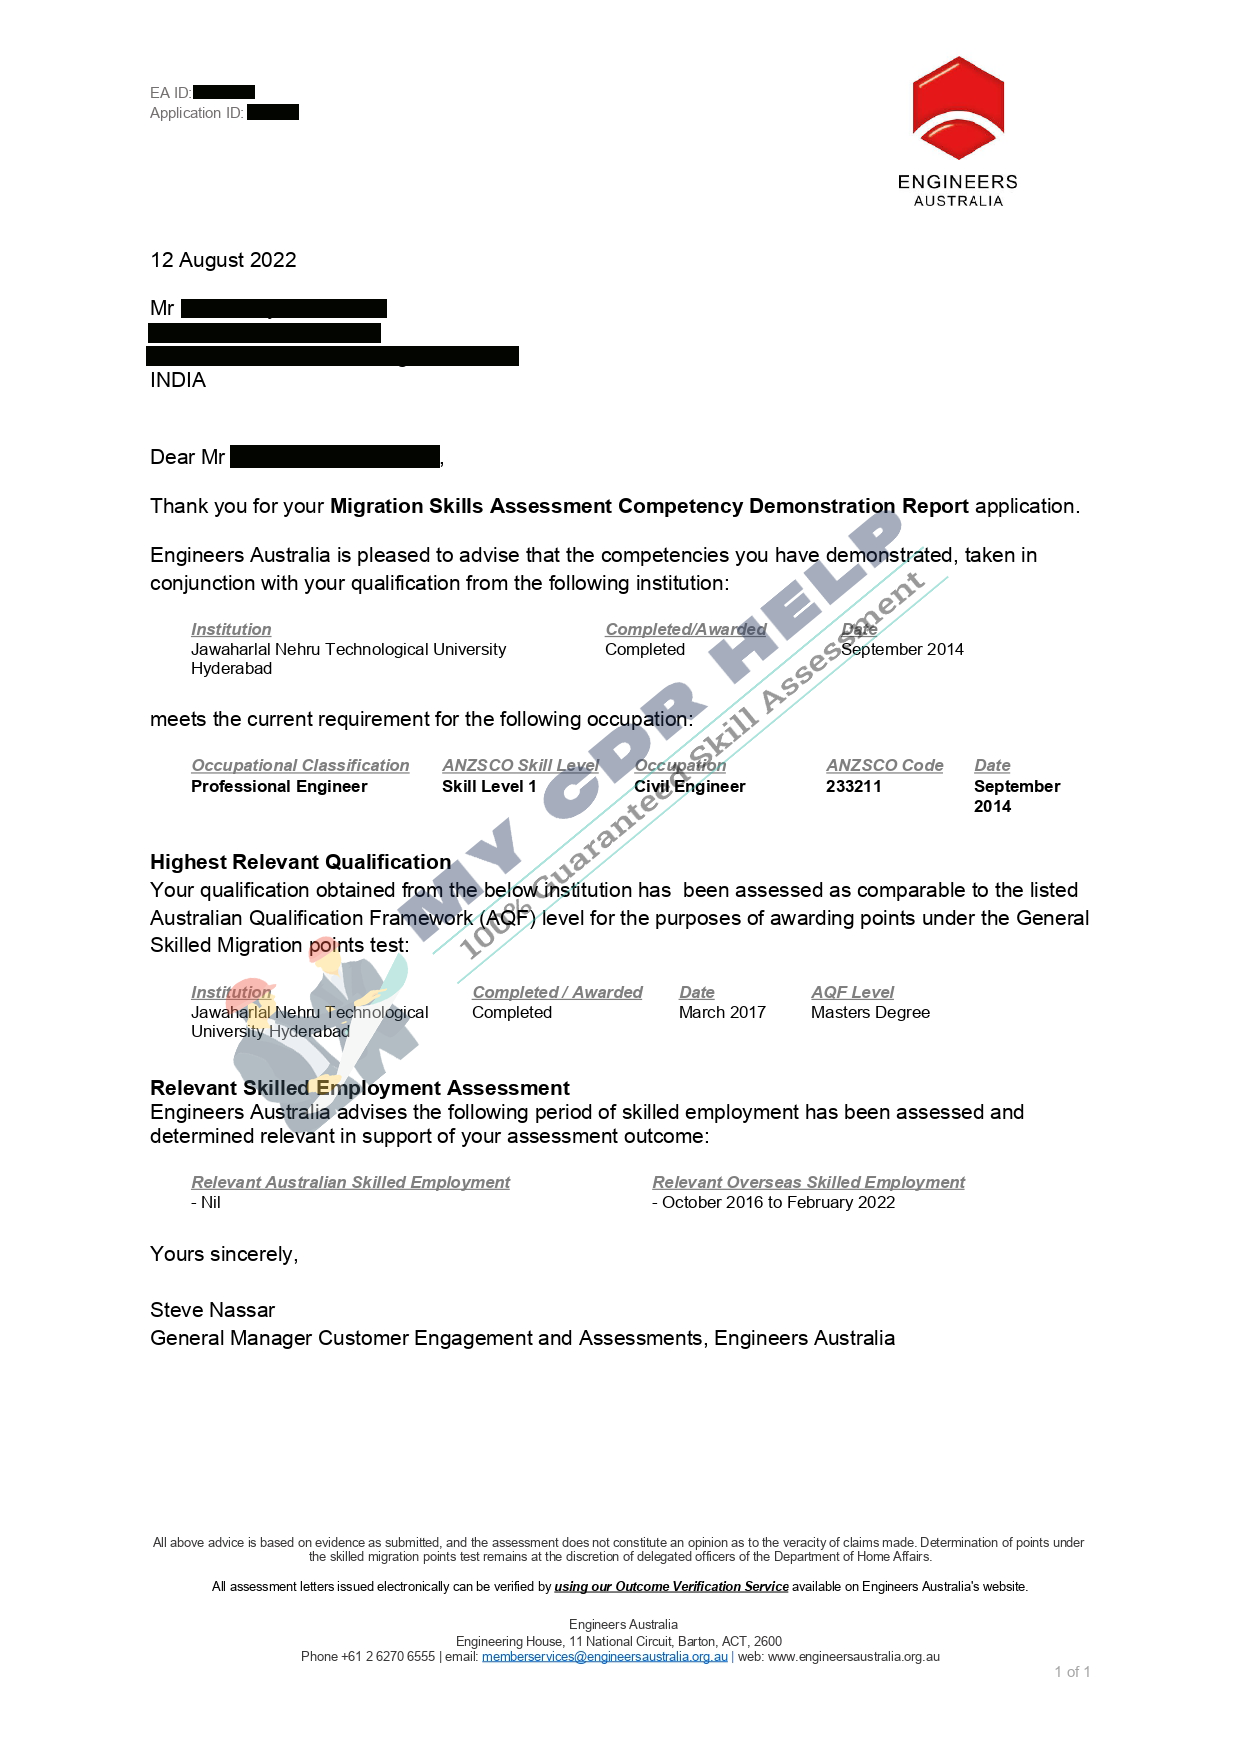 EA Approved CDR engineer letter Aug 2022